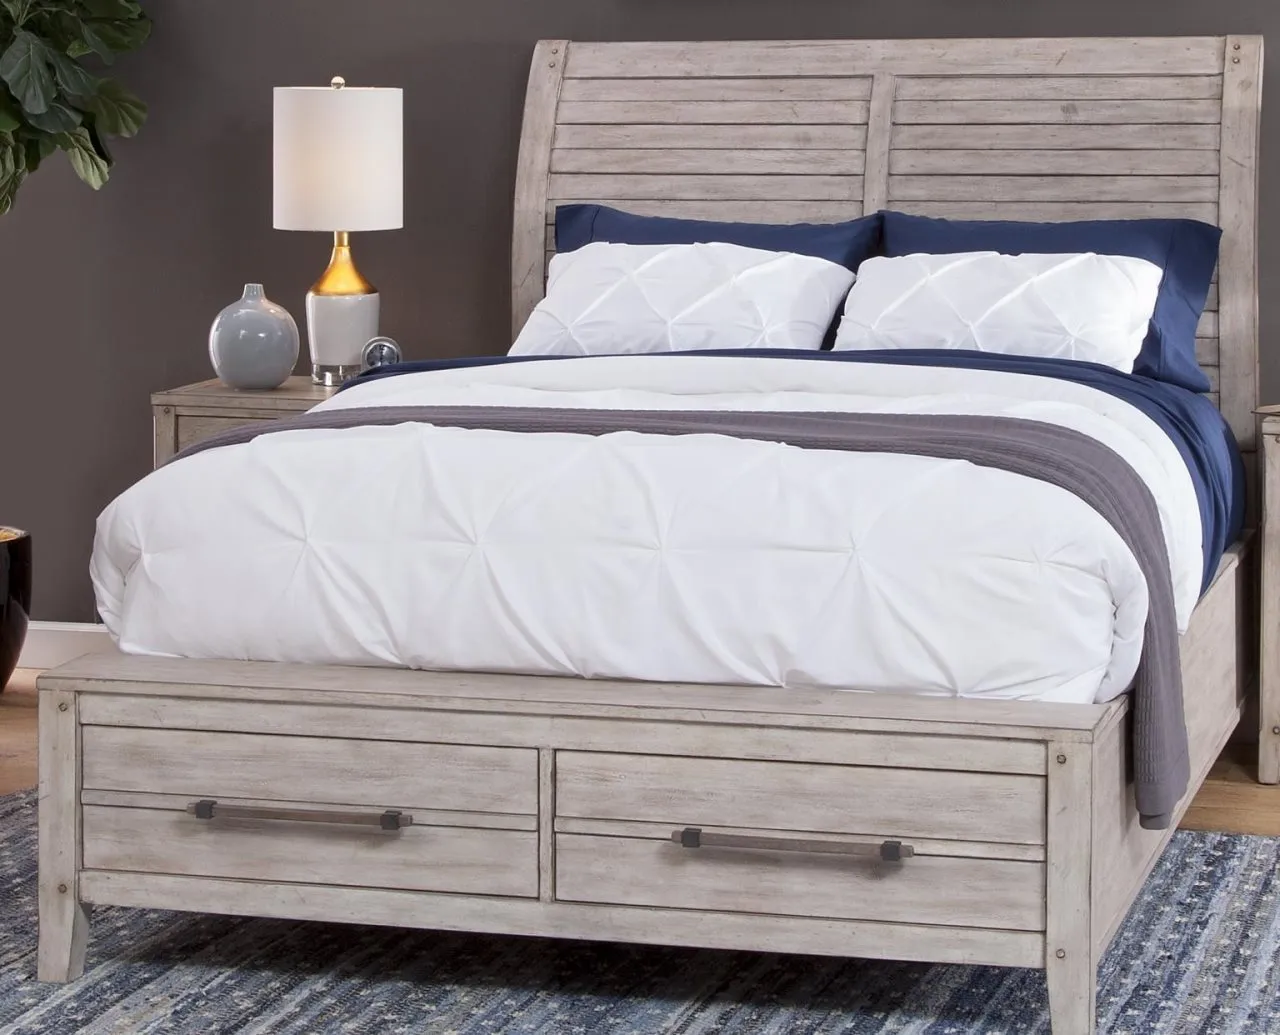 QUEEN COMPLETE SLEIGH BED W/ STORAGE FOOTBOARD